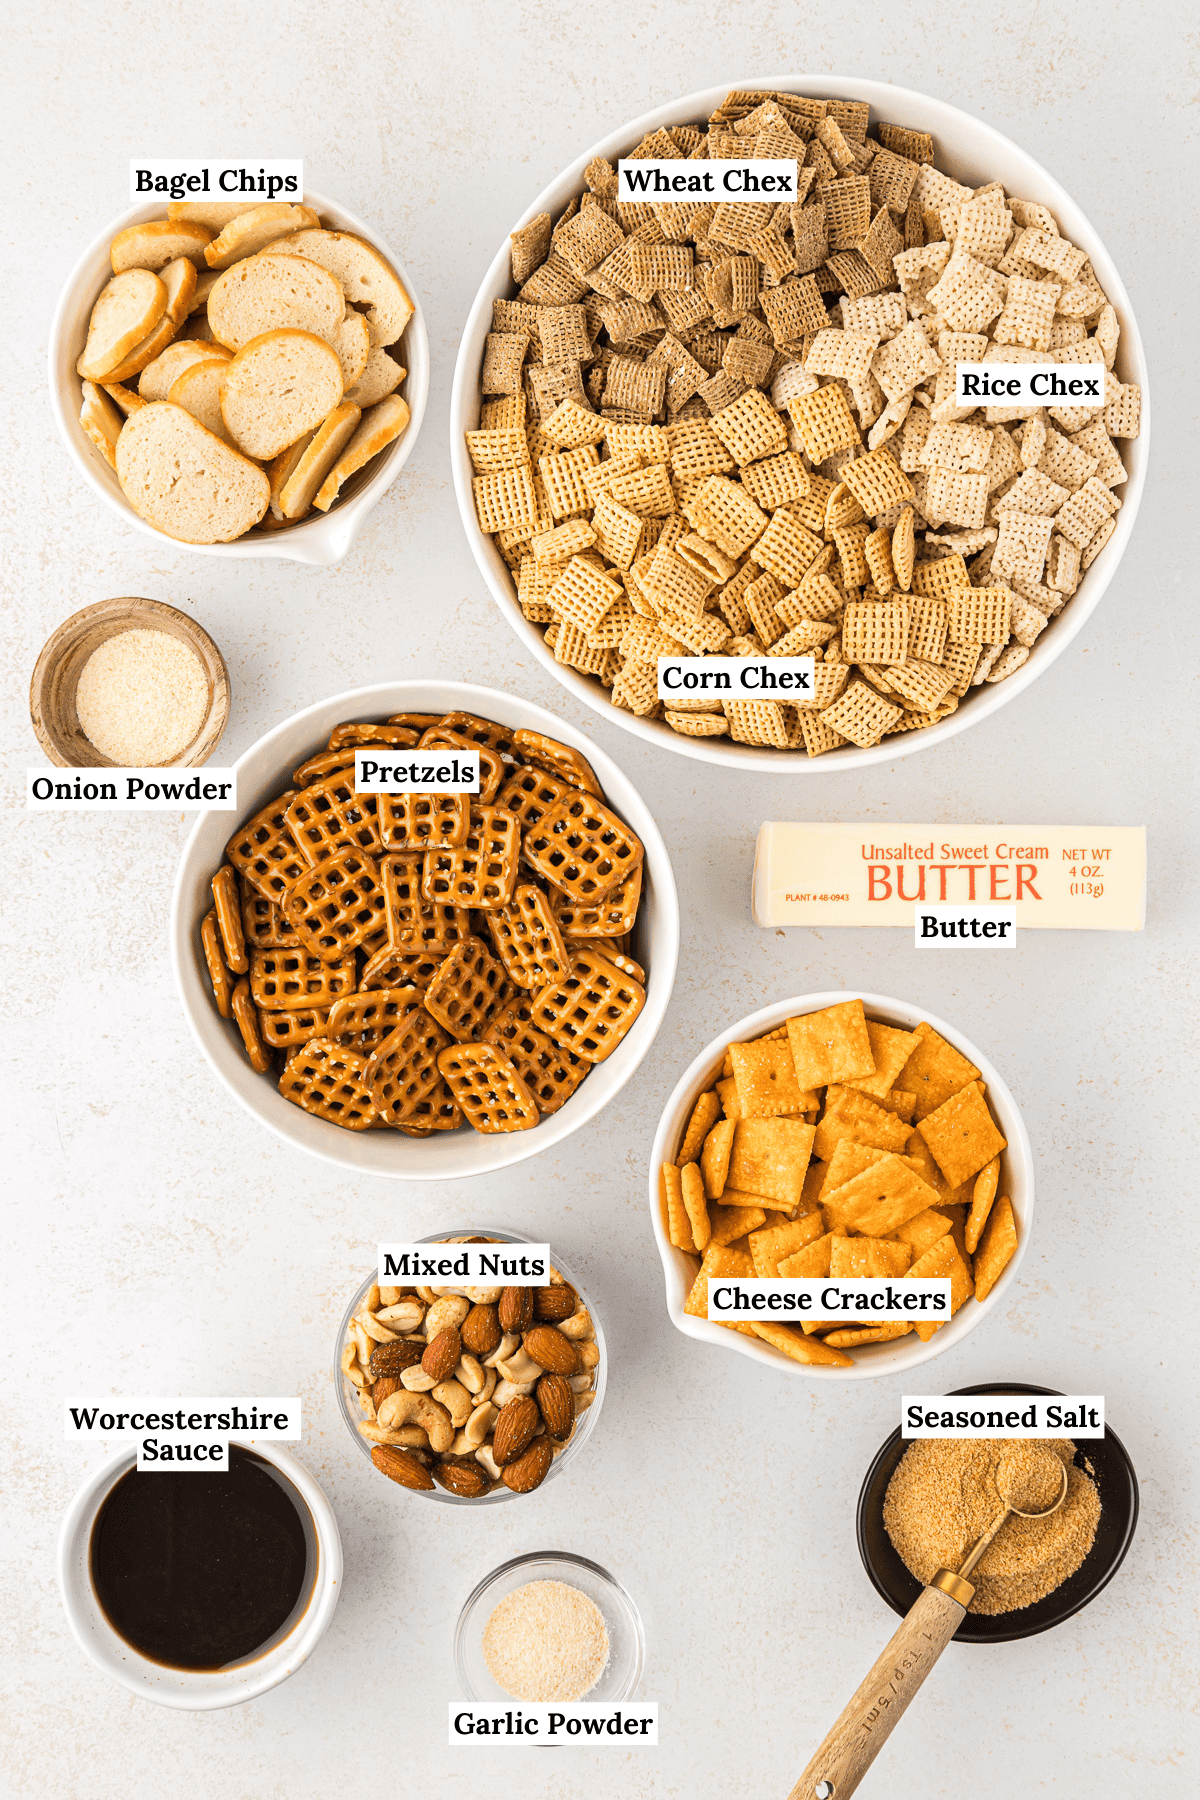 over head view of homemade chex mix ingredients including wheat chex, rice chex, corn chex, bagel chips, onion powder, pretzels, a stick of butter, cheese crackers, mixed nuts, seasoned salt, worcestershire sauce, and garlic powder